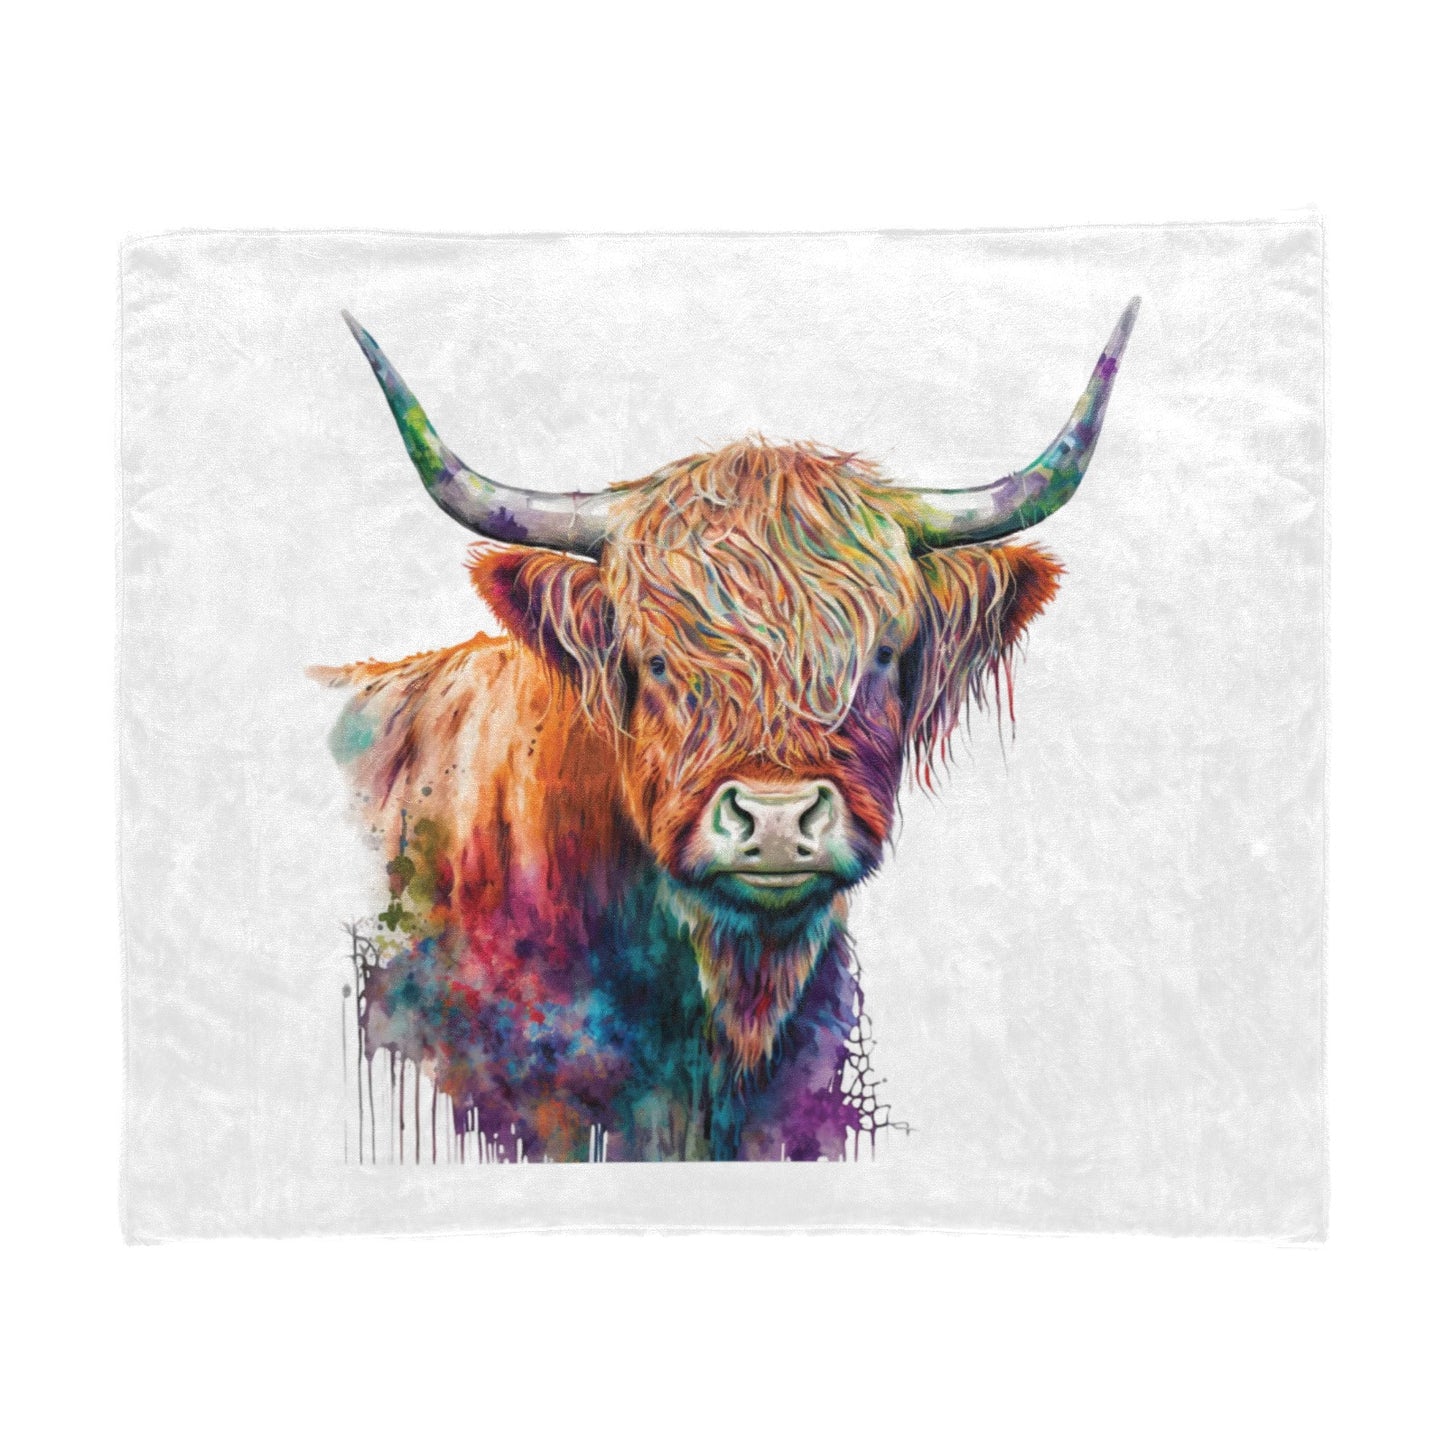 Watercolor Highland 60" x 50" Throw Blanket